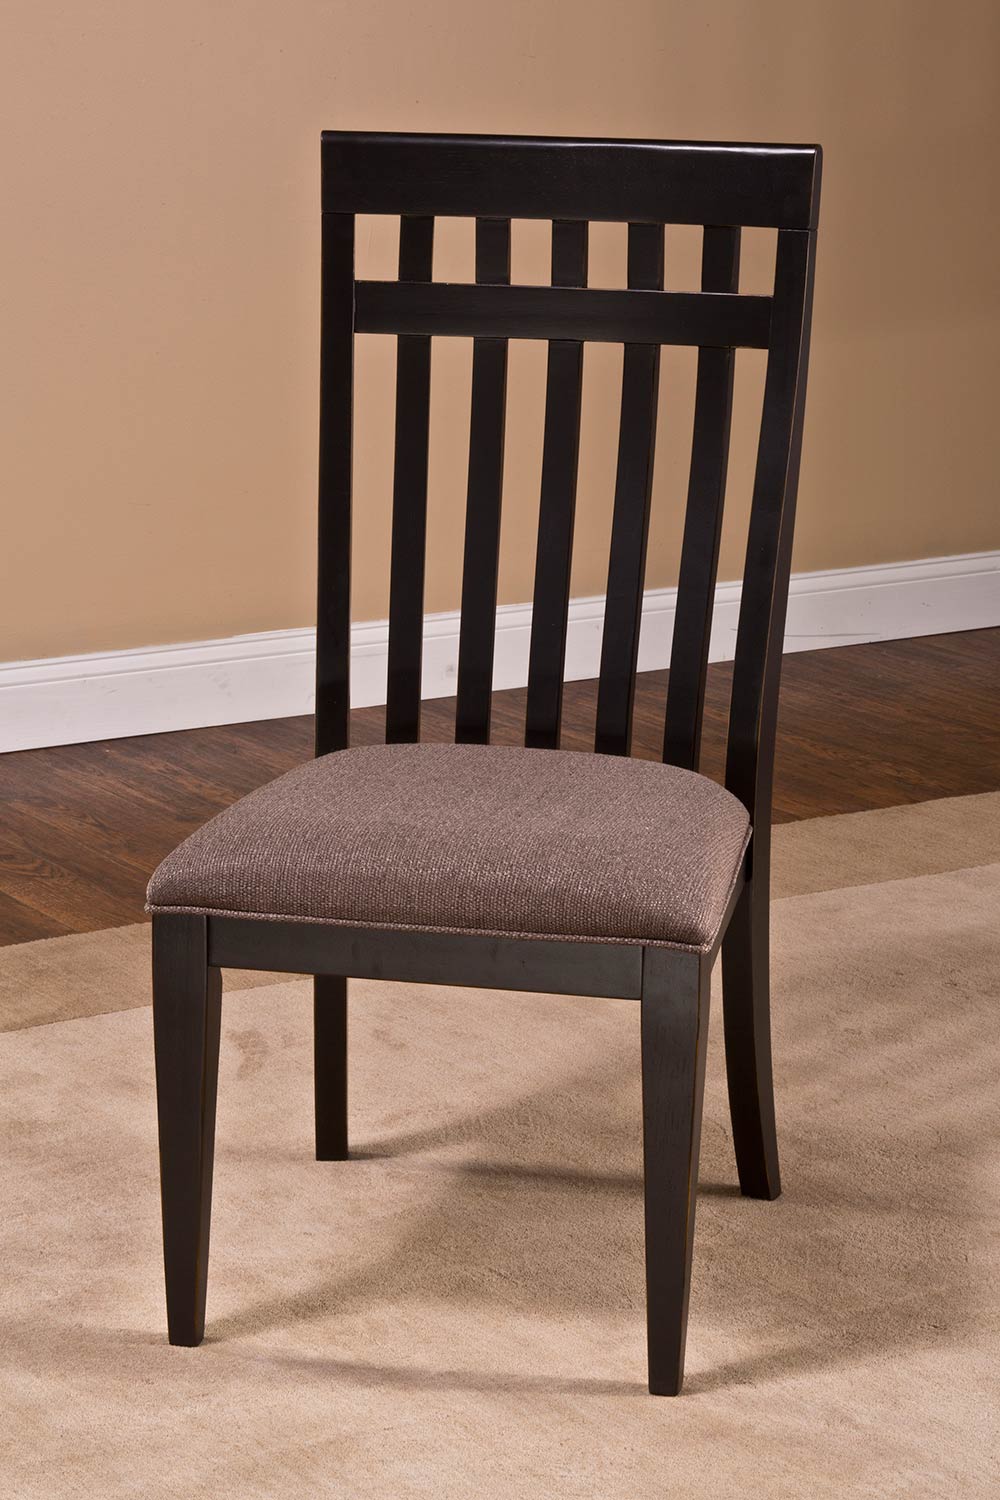 Hillsdale Copeland Dining Chair - Distressed Black - Woven Gray Fabric